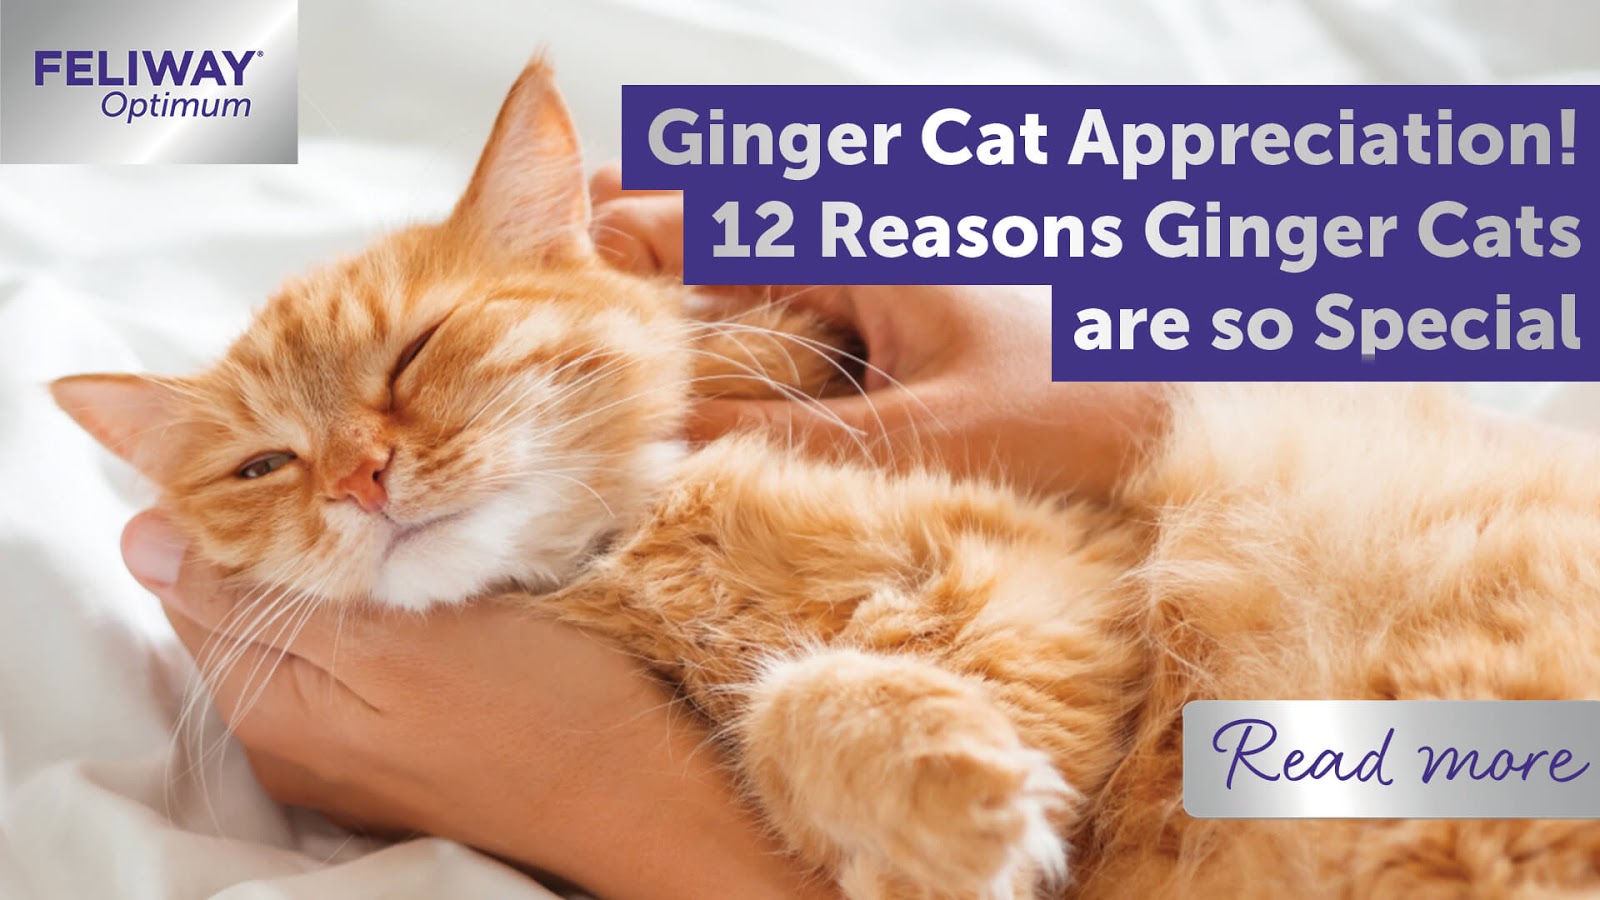 Ginger Cat Appreciation! 12 Reasons Ginger Cats are so Special